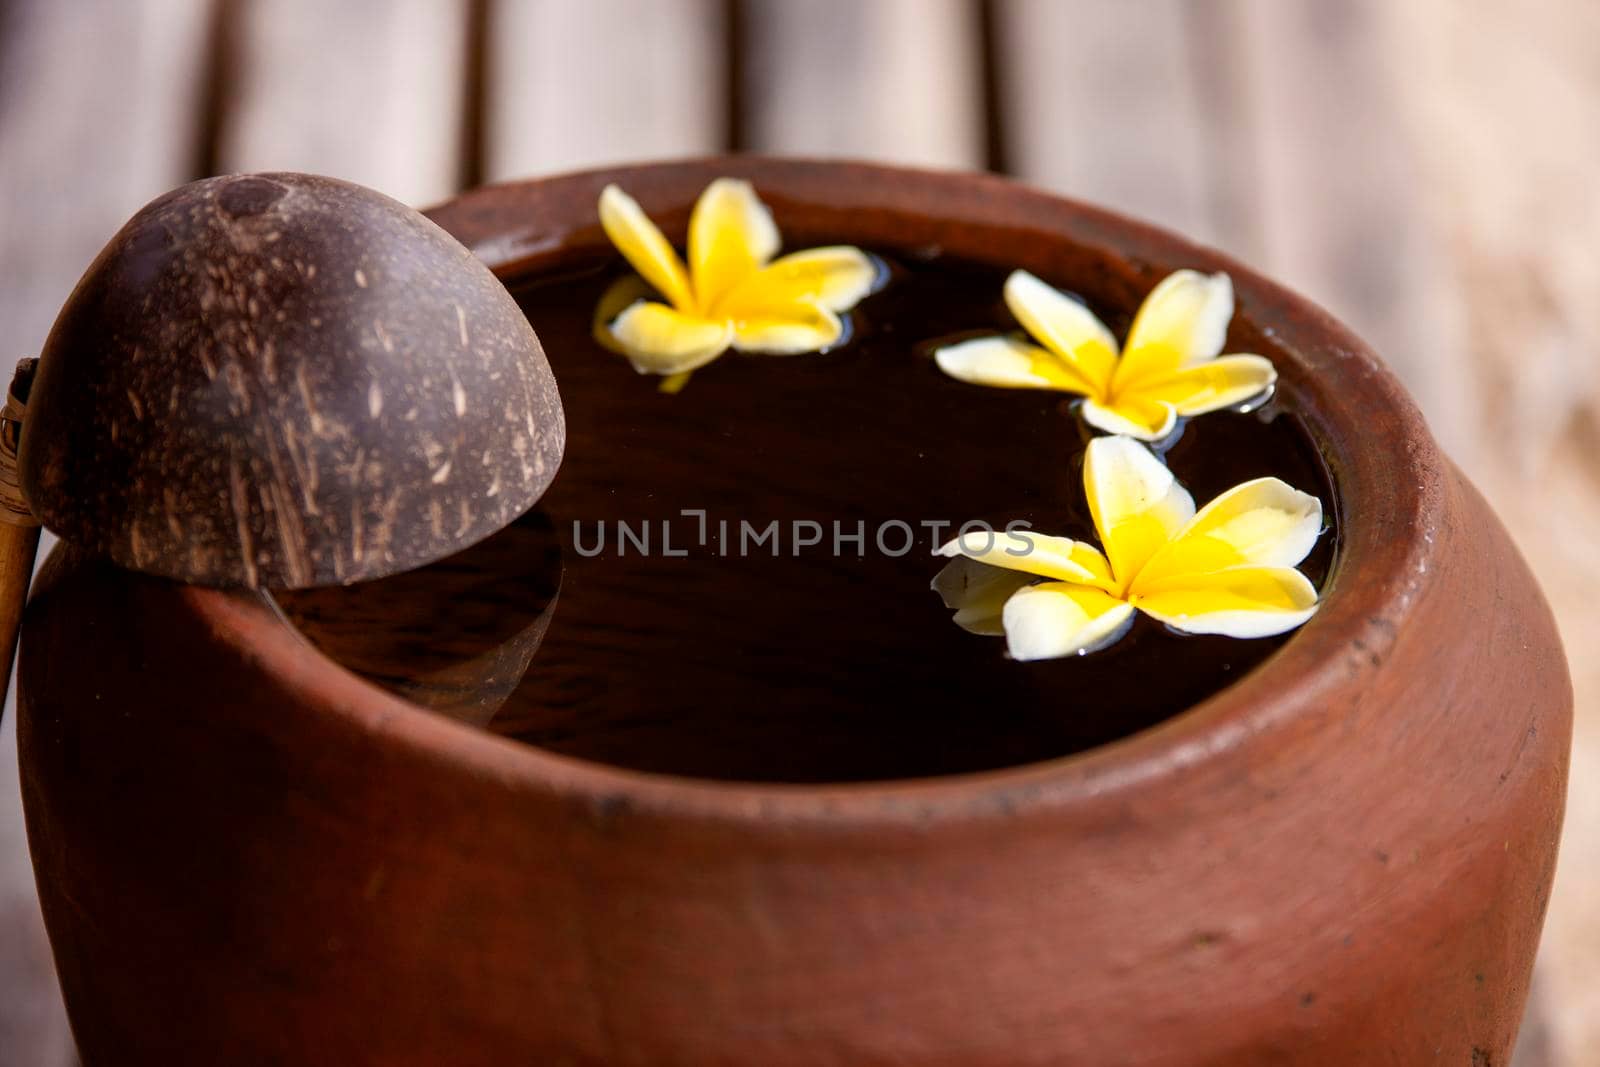 Touching nature. Clay jug relaxing and peaceful with flower plumeria or frangipani decorated on water in bowl in zen style for spa meditation mood